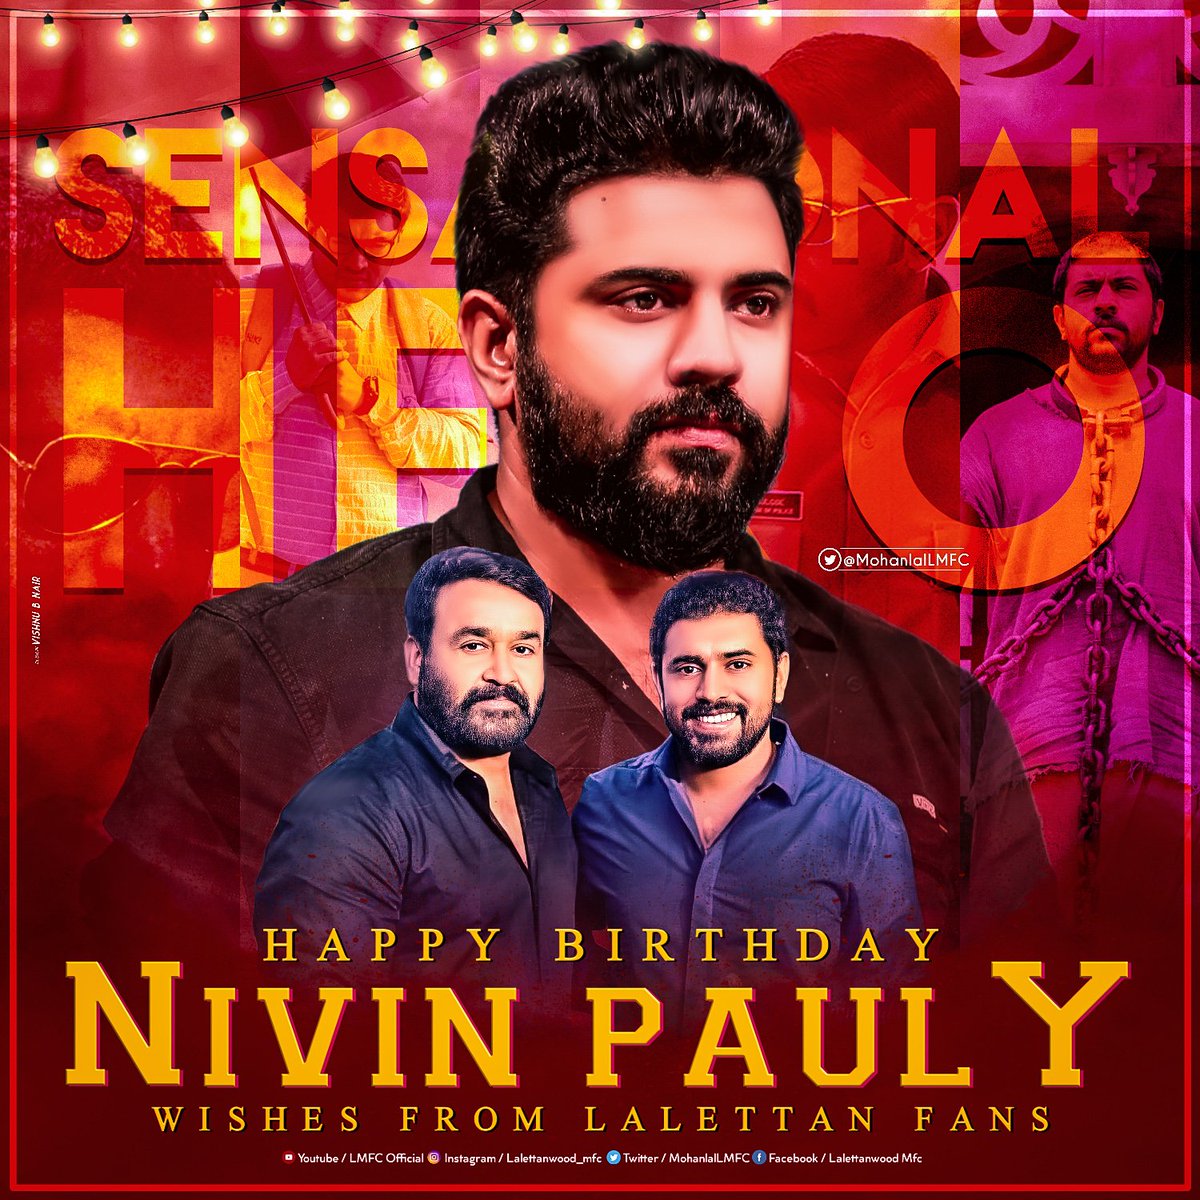 One of the greath youthactor of 'M' Town                                                     #HappyBirthdayNIVINPAULY